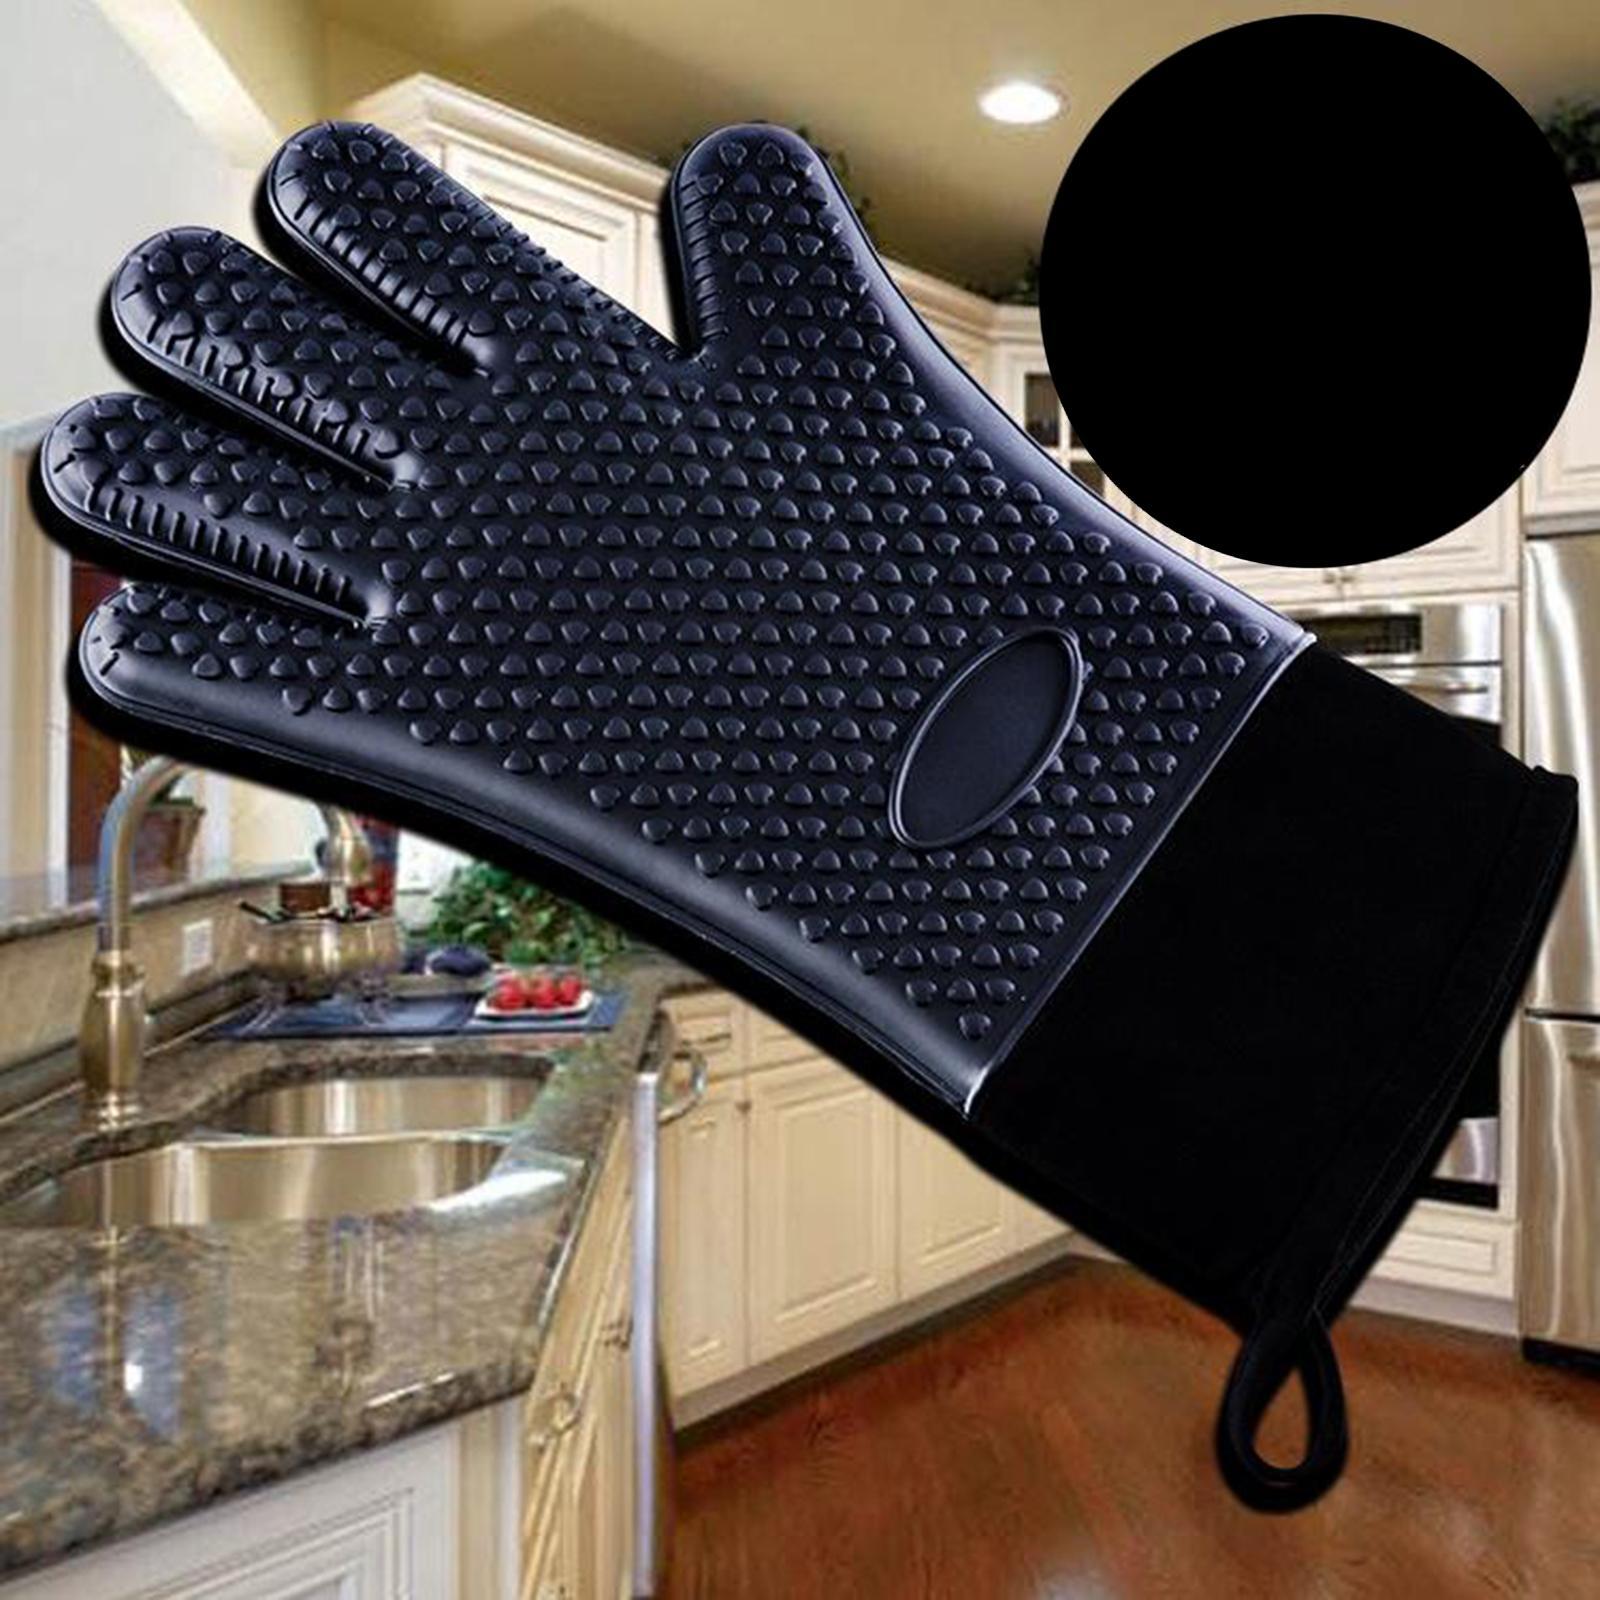 Premium Oven Gloves Insulated Long Anti-scalding Mitts for Cooking